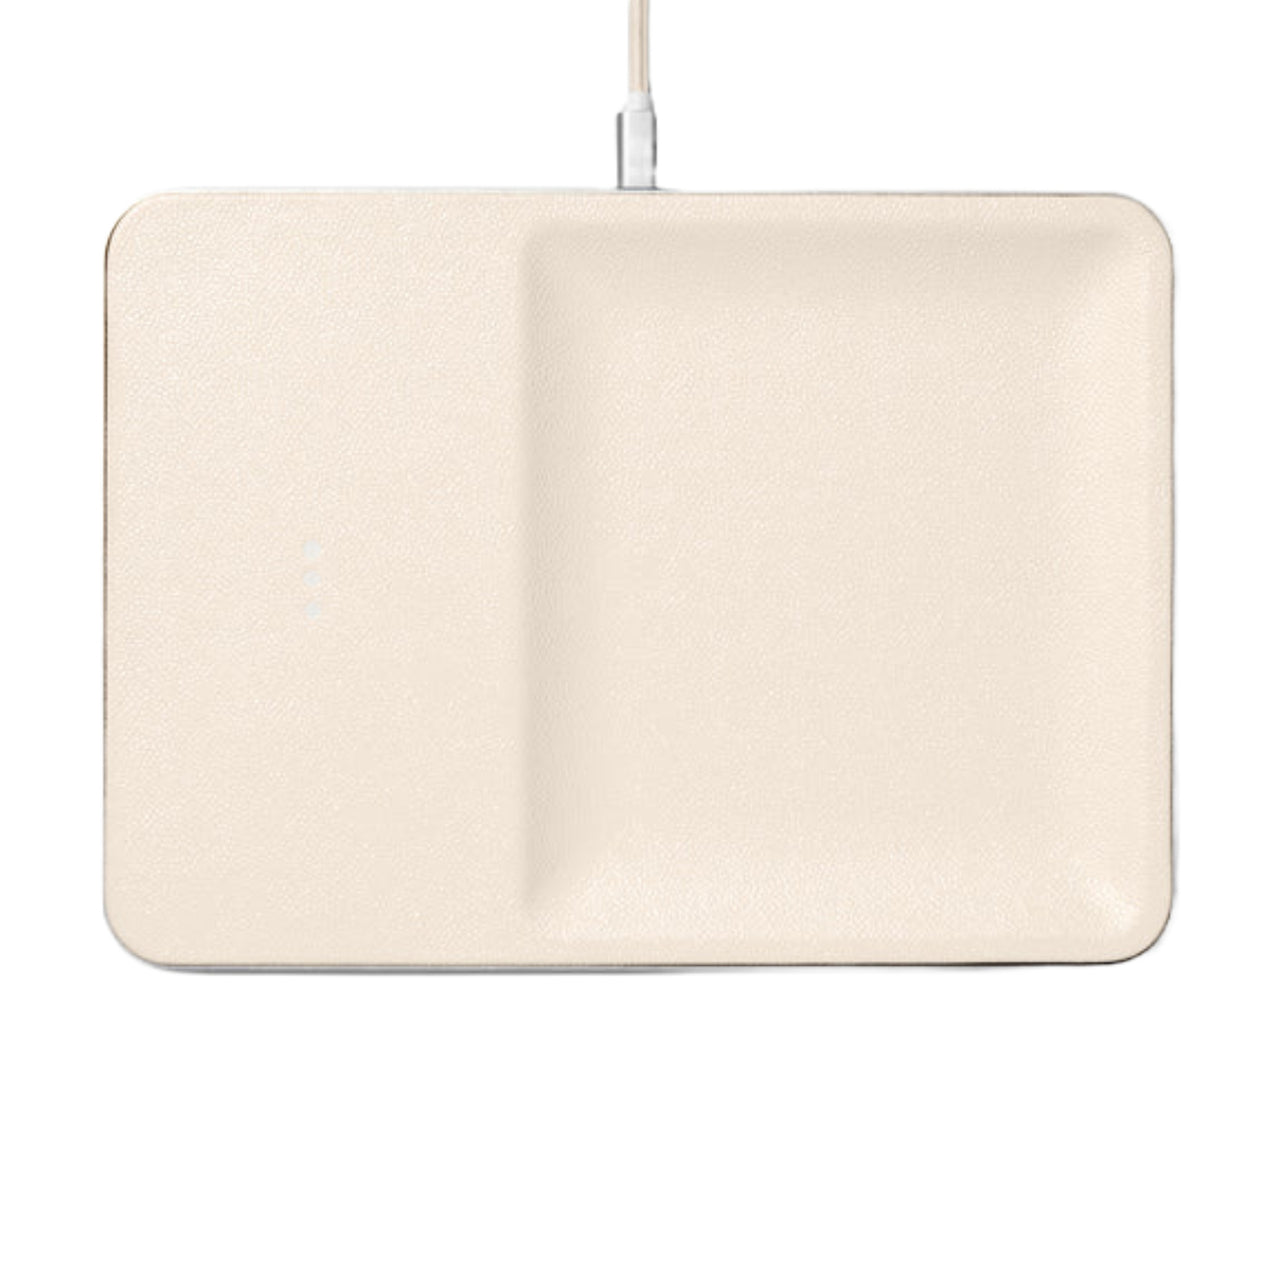 Catch 3 | Bone Leather Wireless Charger with Valet Tray